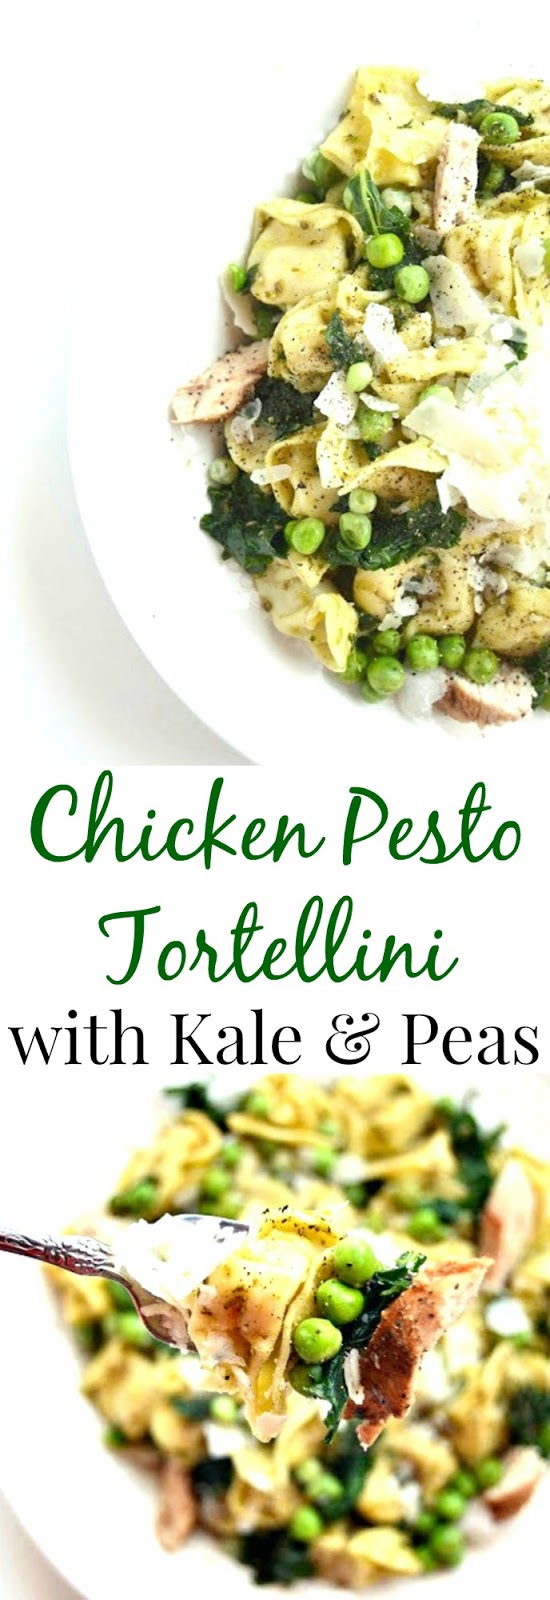 Chicken Pesto Tortellini with Kale and Peas is ready in just 20 minutes and is a flavorful and healthy meal that the whole family will love! www.nutritionistreviews.com